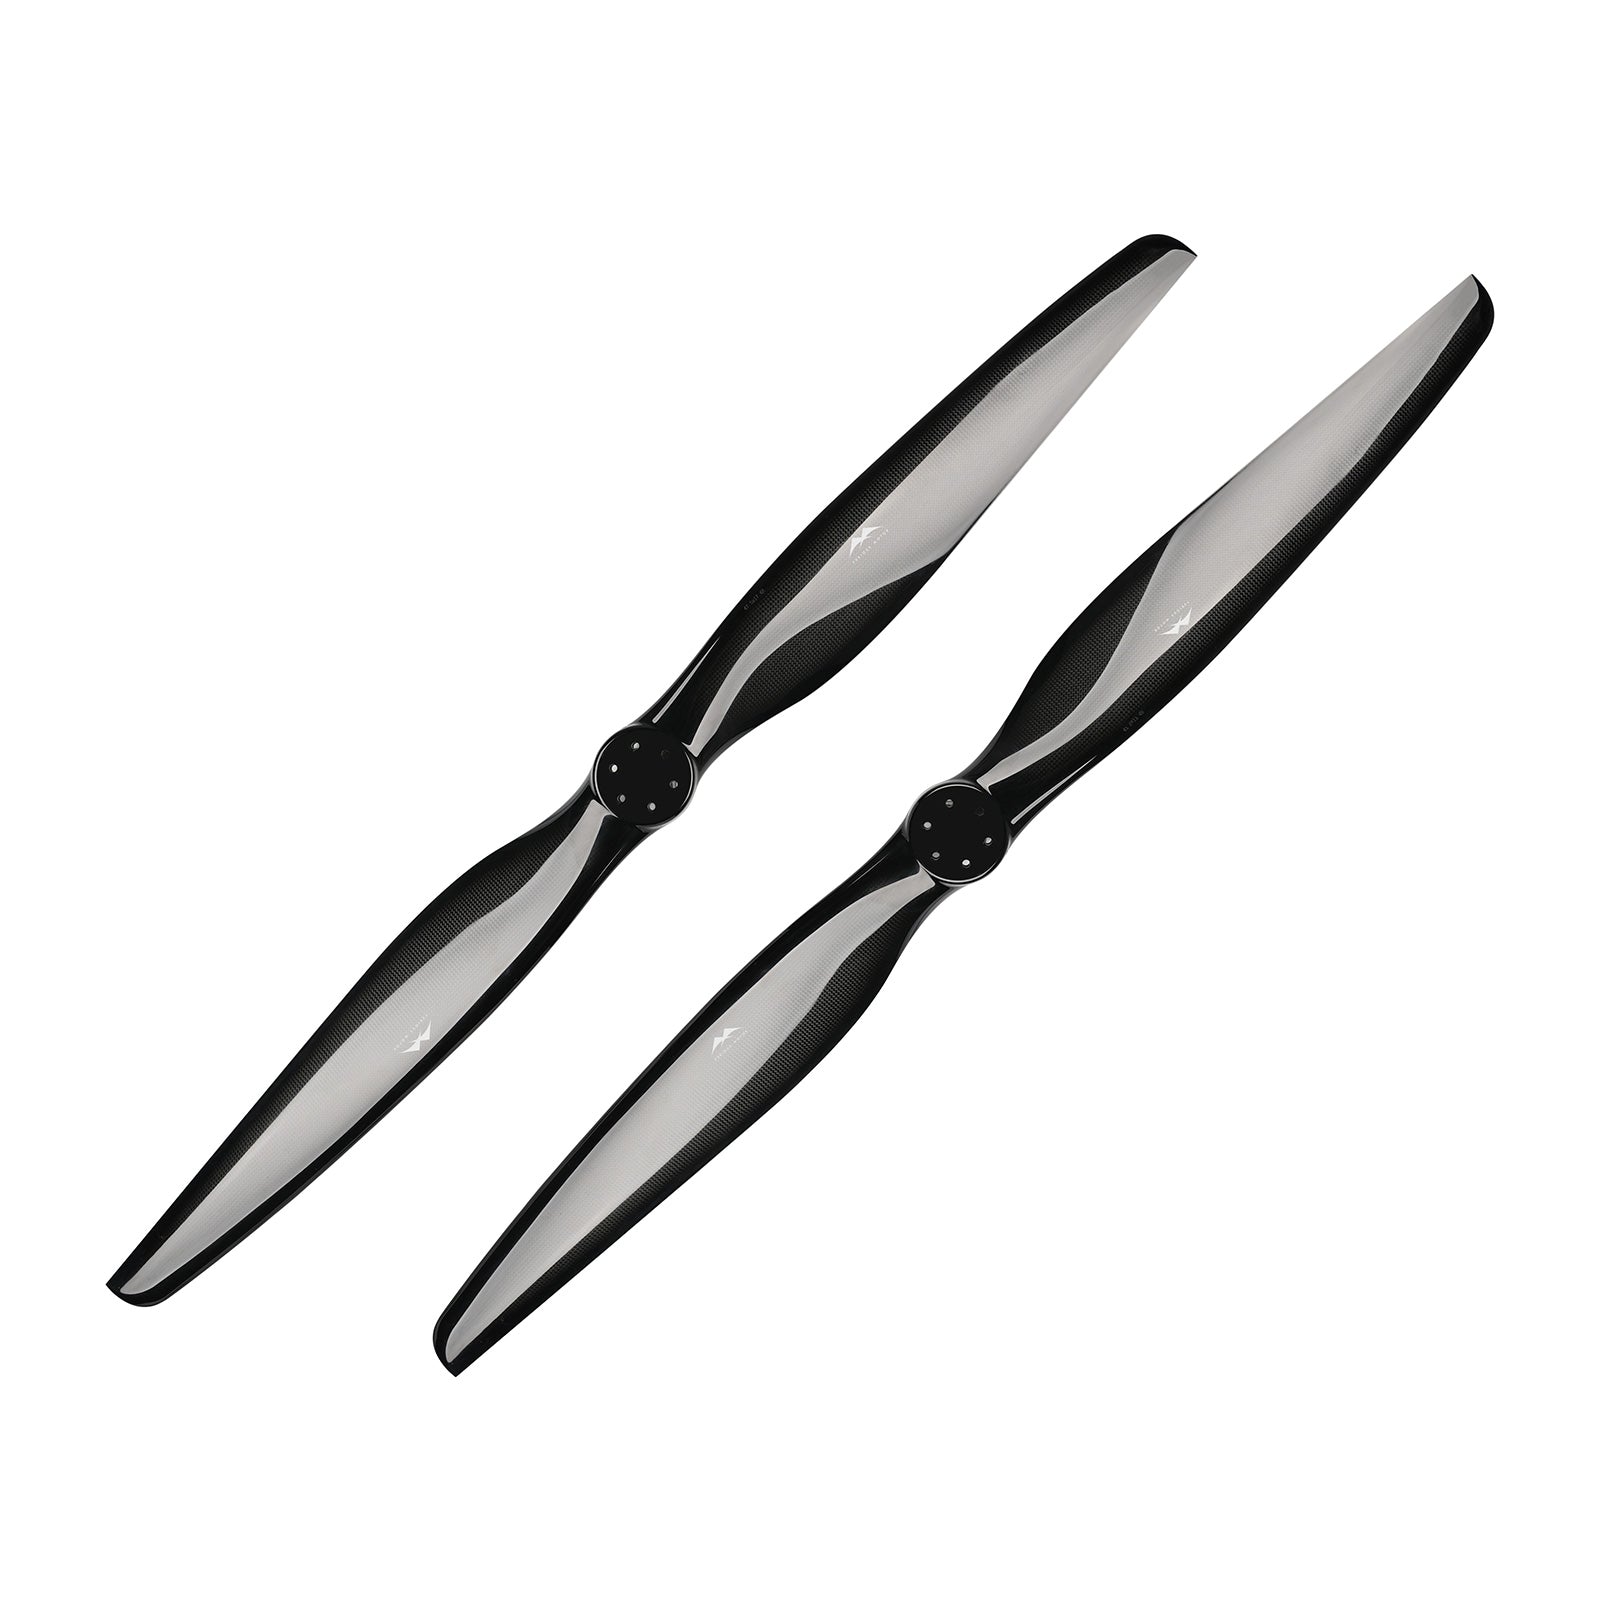 47 Inch CW CCW Lightweight Carbon Fiber Propeller for Big Drone and Paraglider